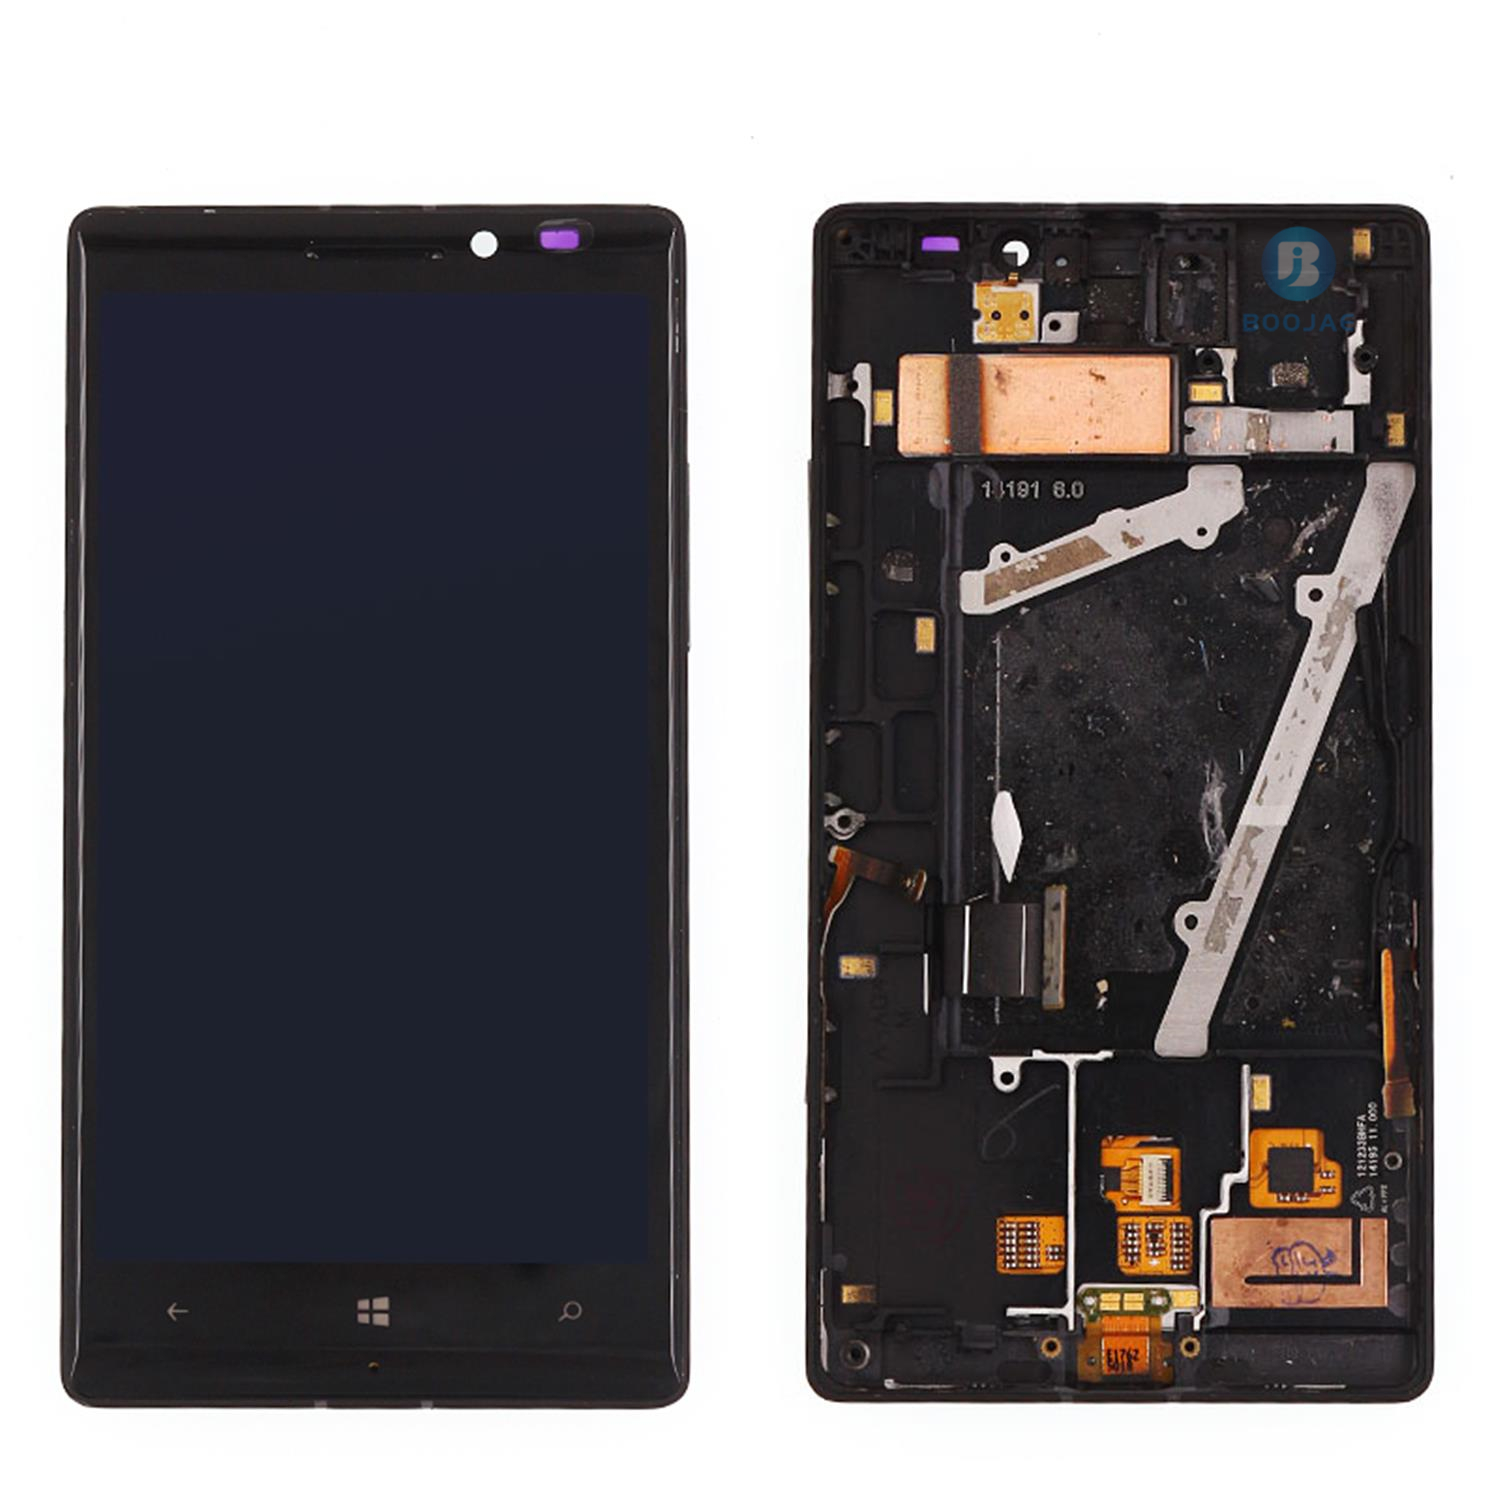 For Nokia Lumia 930 LCD Screen Display and Touch Panel Digitizer Assembly Replacement